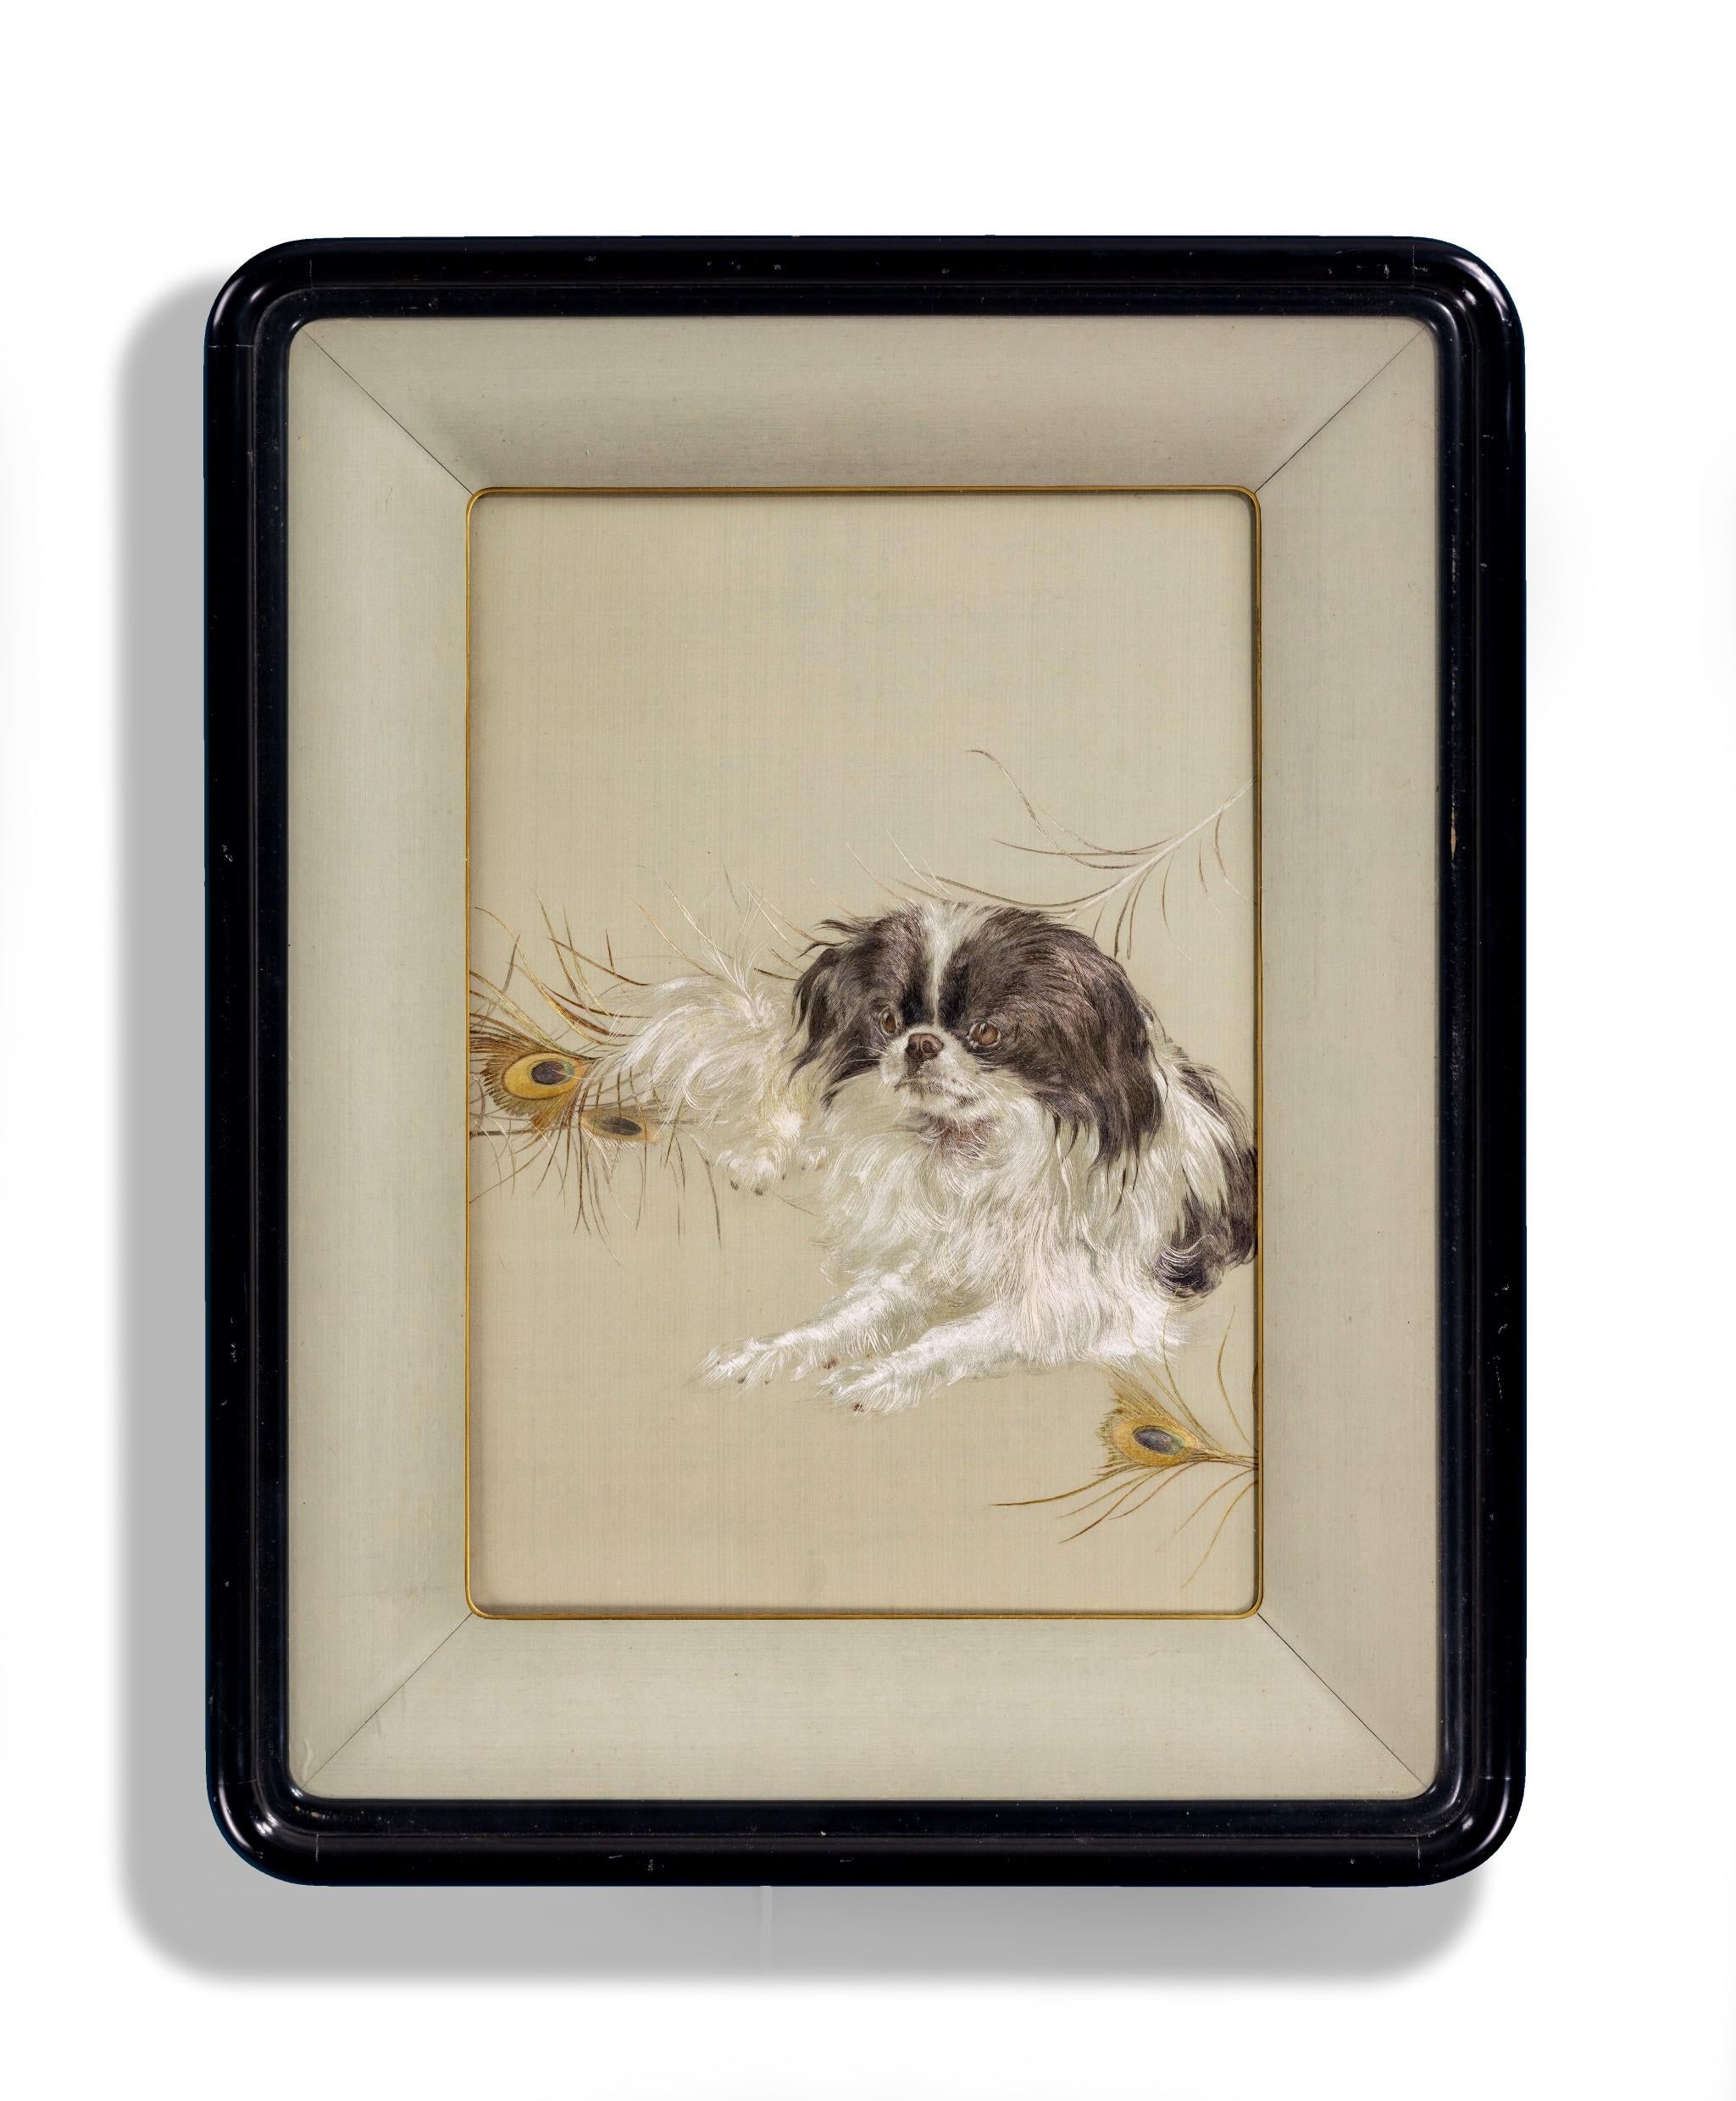 As part of our Japanese works of art collection we are delighted to offer this charming Meiji period 1868-1912 embroidery of a chin dog aside a spray of peacock feathers and by one of the most famous textile company’s of the period, the Iida